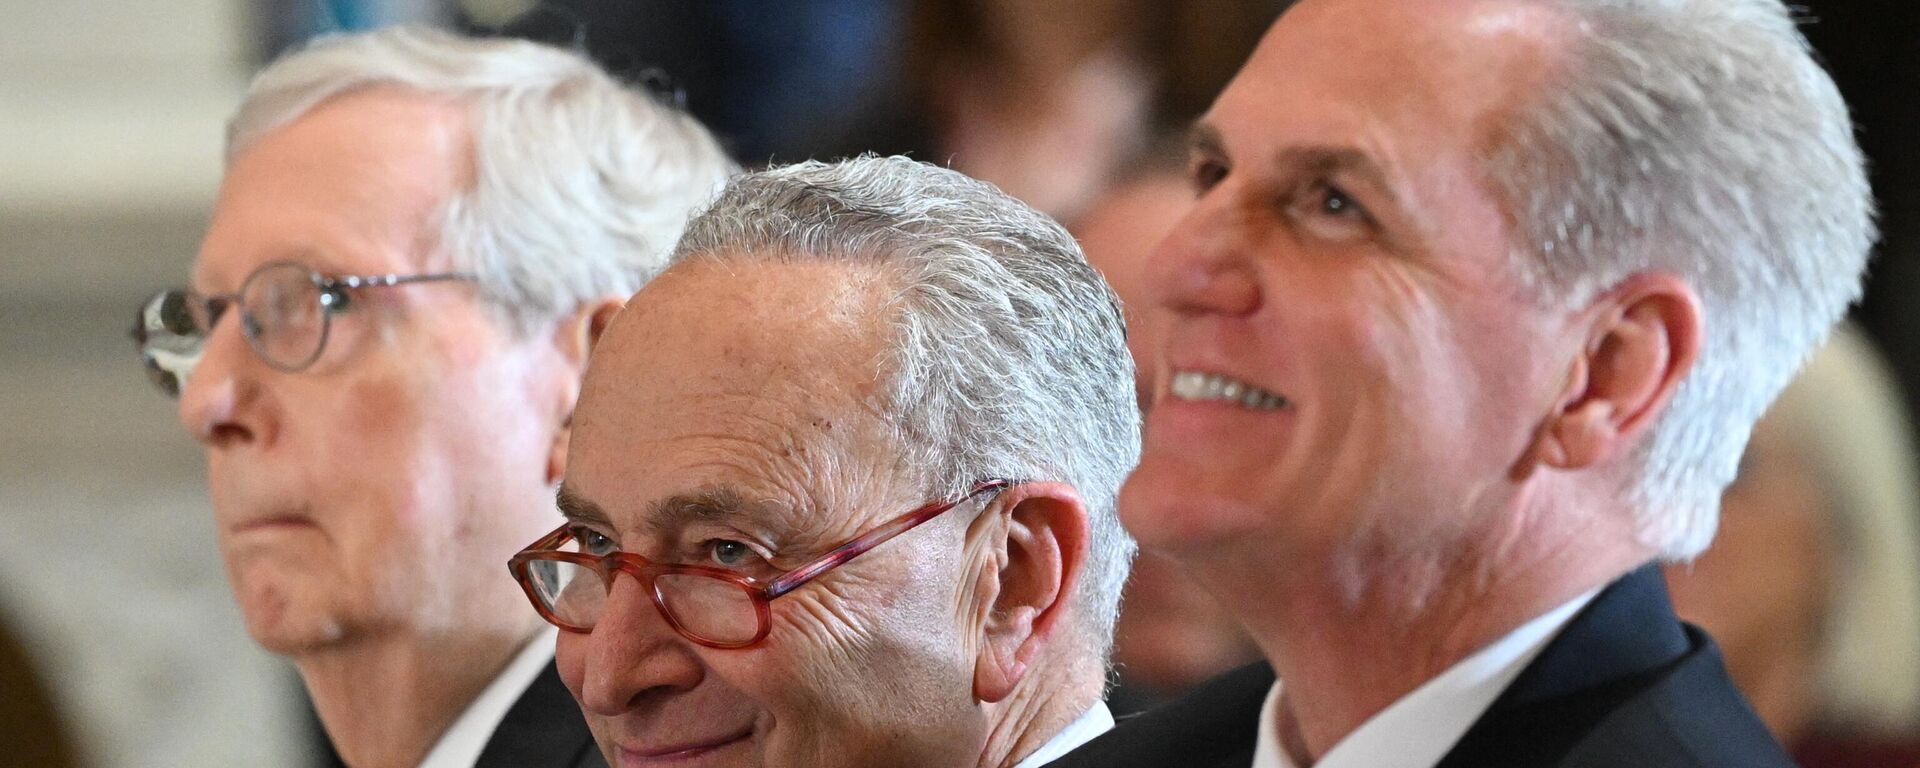 (L to R) Senate Minority Leader Mitch McConnell (R-KY), Senate Majority Leader Chuck Schumer (D-NY), and US House Speaker Kevin McCarthy (R-CA),  attend a portrait unveiling for former house speaker Paul Ryan in Statuary Hall at the US Capitol in Washington, DC on May 17, 2023. - Sputnik International, 1920, 23.08.2023